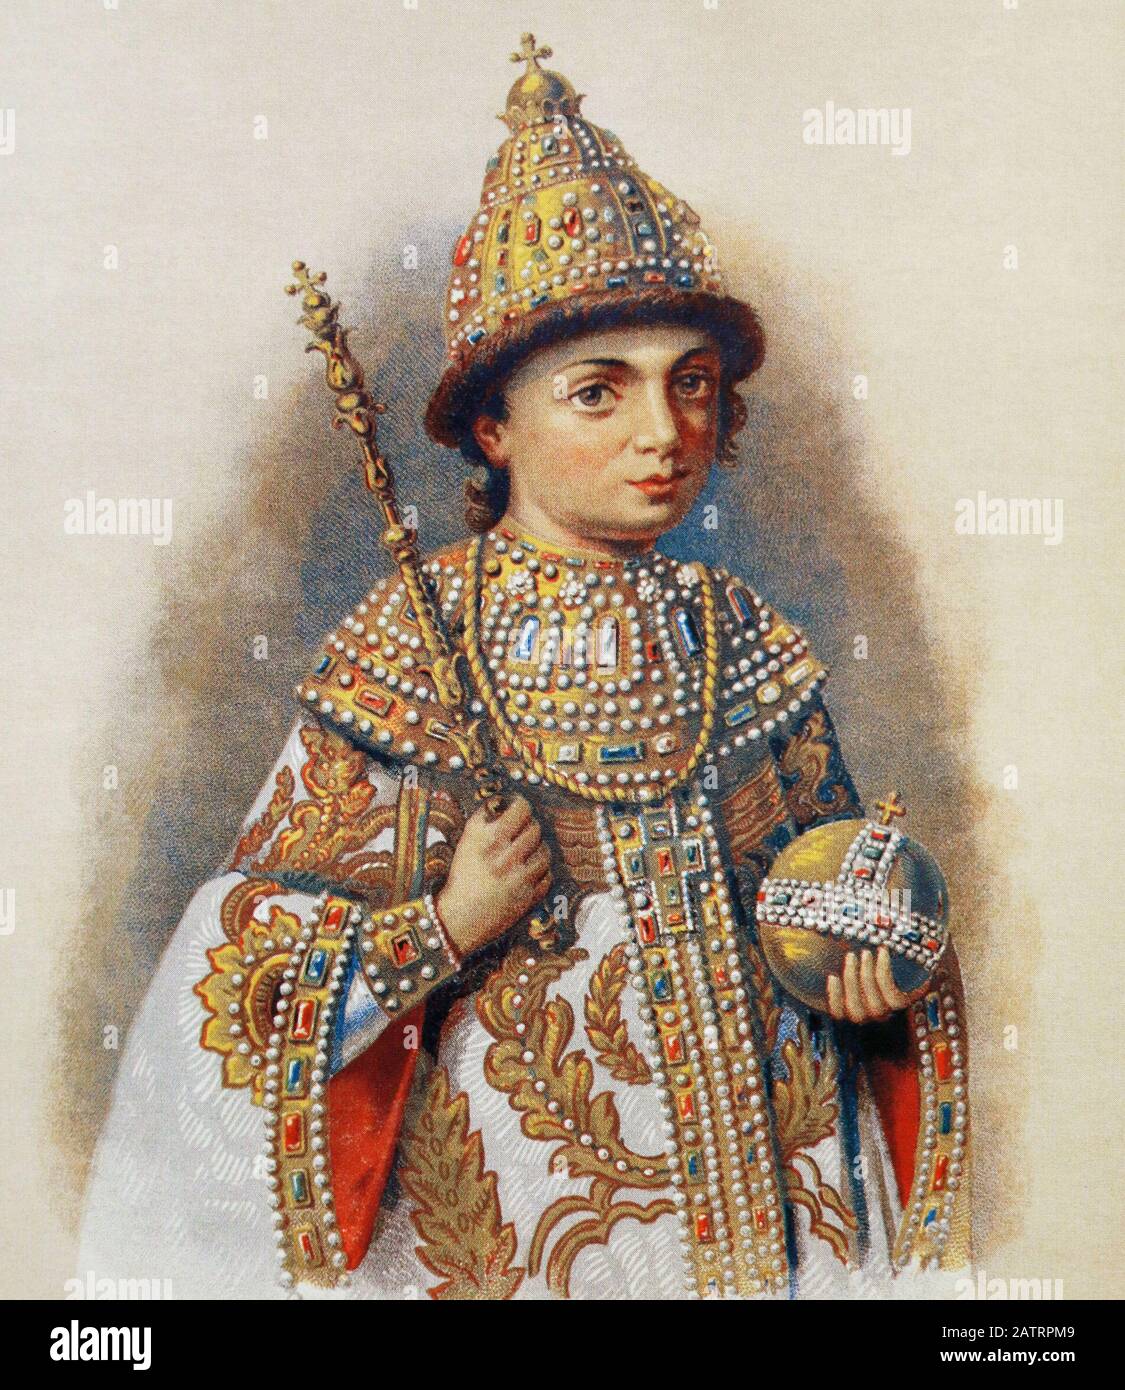 Russian Tsar Peter I Alekseevich in childhood. Painting by P. Borel, 19th century. Stock Photo